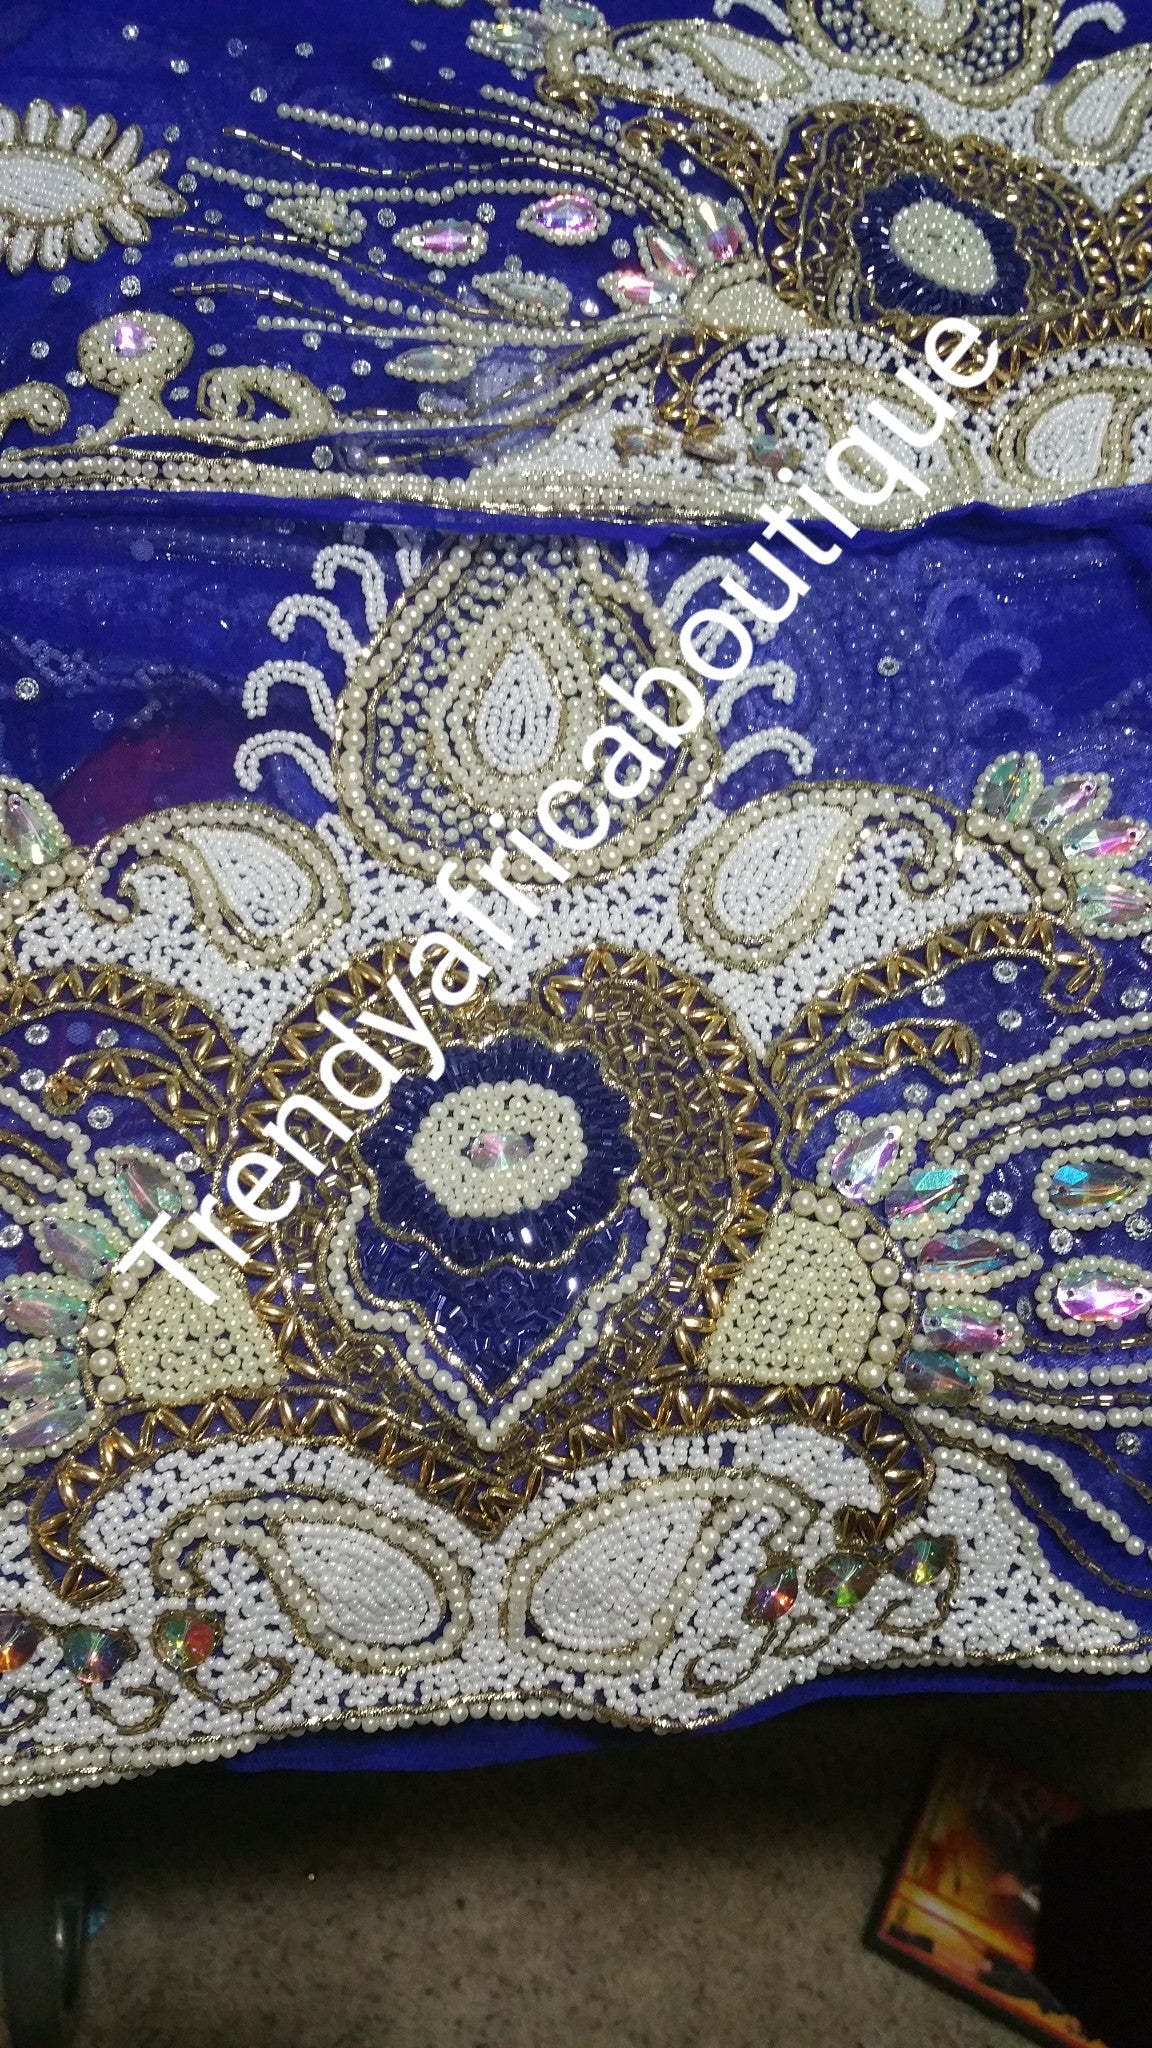 Clearance Sale: Royal blue VIP heavily Beaded and stones Net George wrapper for Nigerians/Igbo tradional wedding ceremony. Sold 6.5yds total